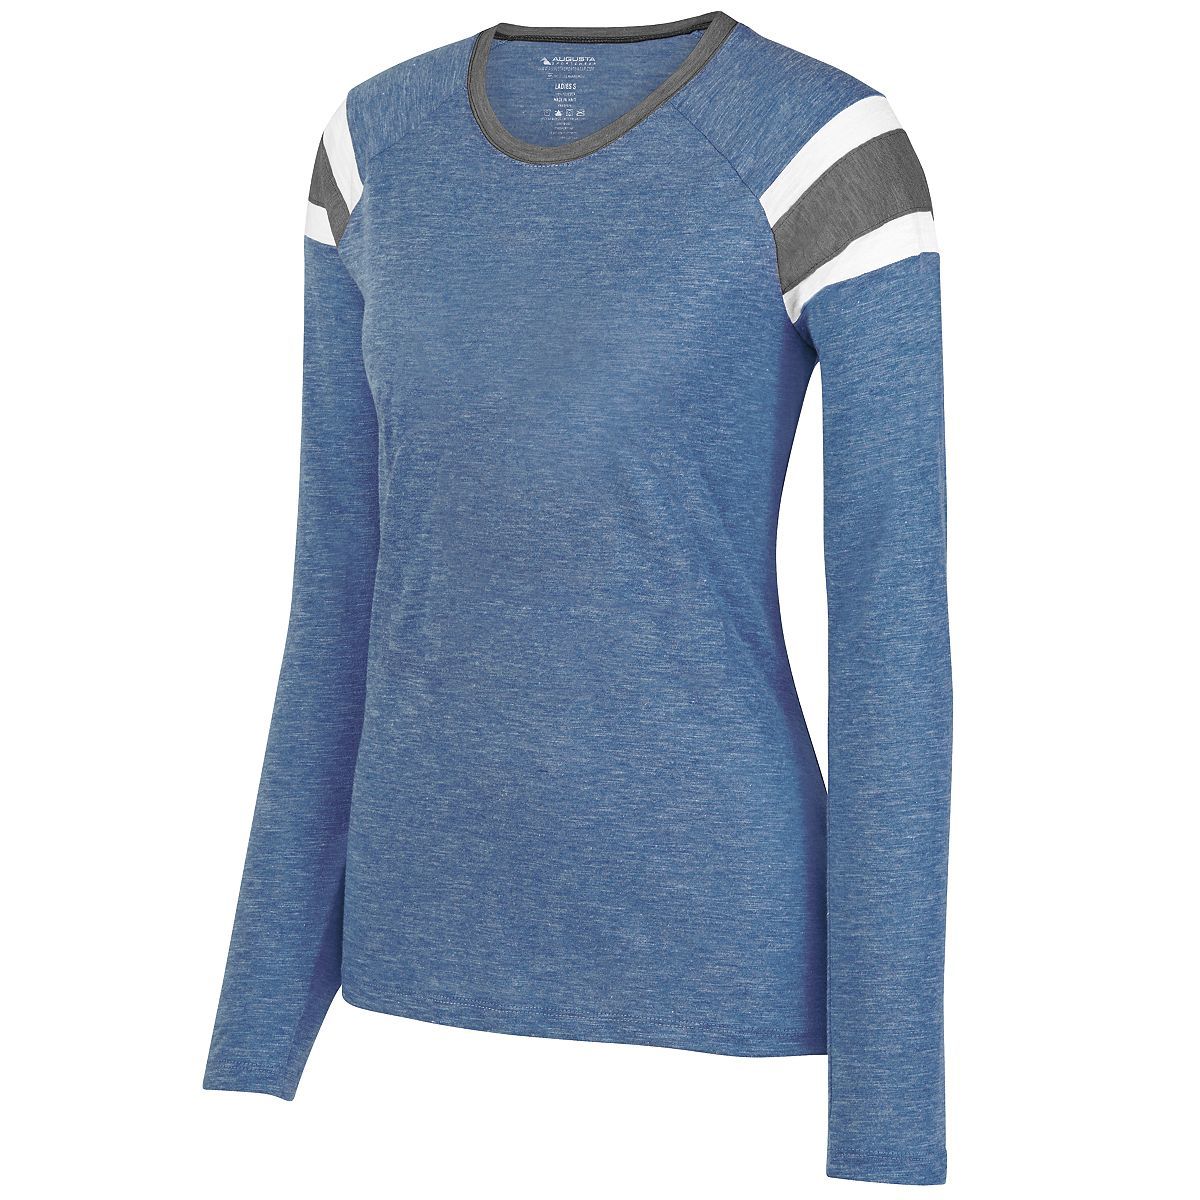 Augusta Sportswear Ladies Long Sleeve Fanatic Tee in Royal/Slate/White  -Part of the Ladies, Ladies-Tee-Shirt, T-Shirts, Augusta-Products, Shirts product lines at KanaleyCreations.com